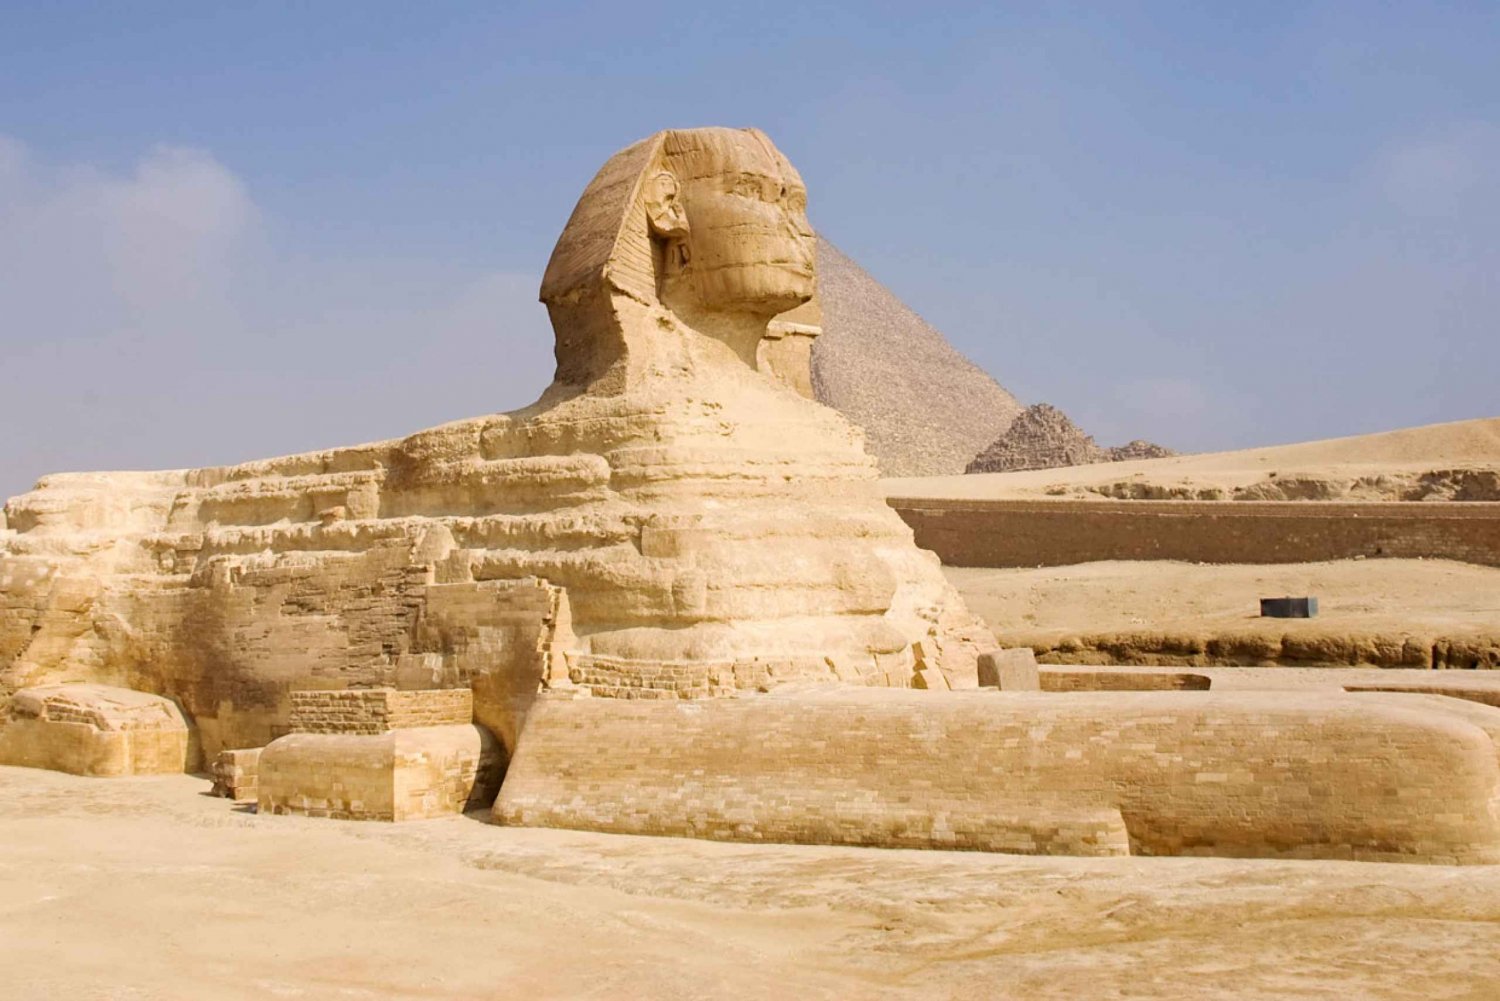 From Hurghada: Cairo Private Day Tour with Flights & Lunch